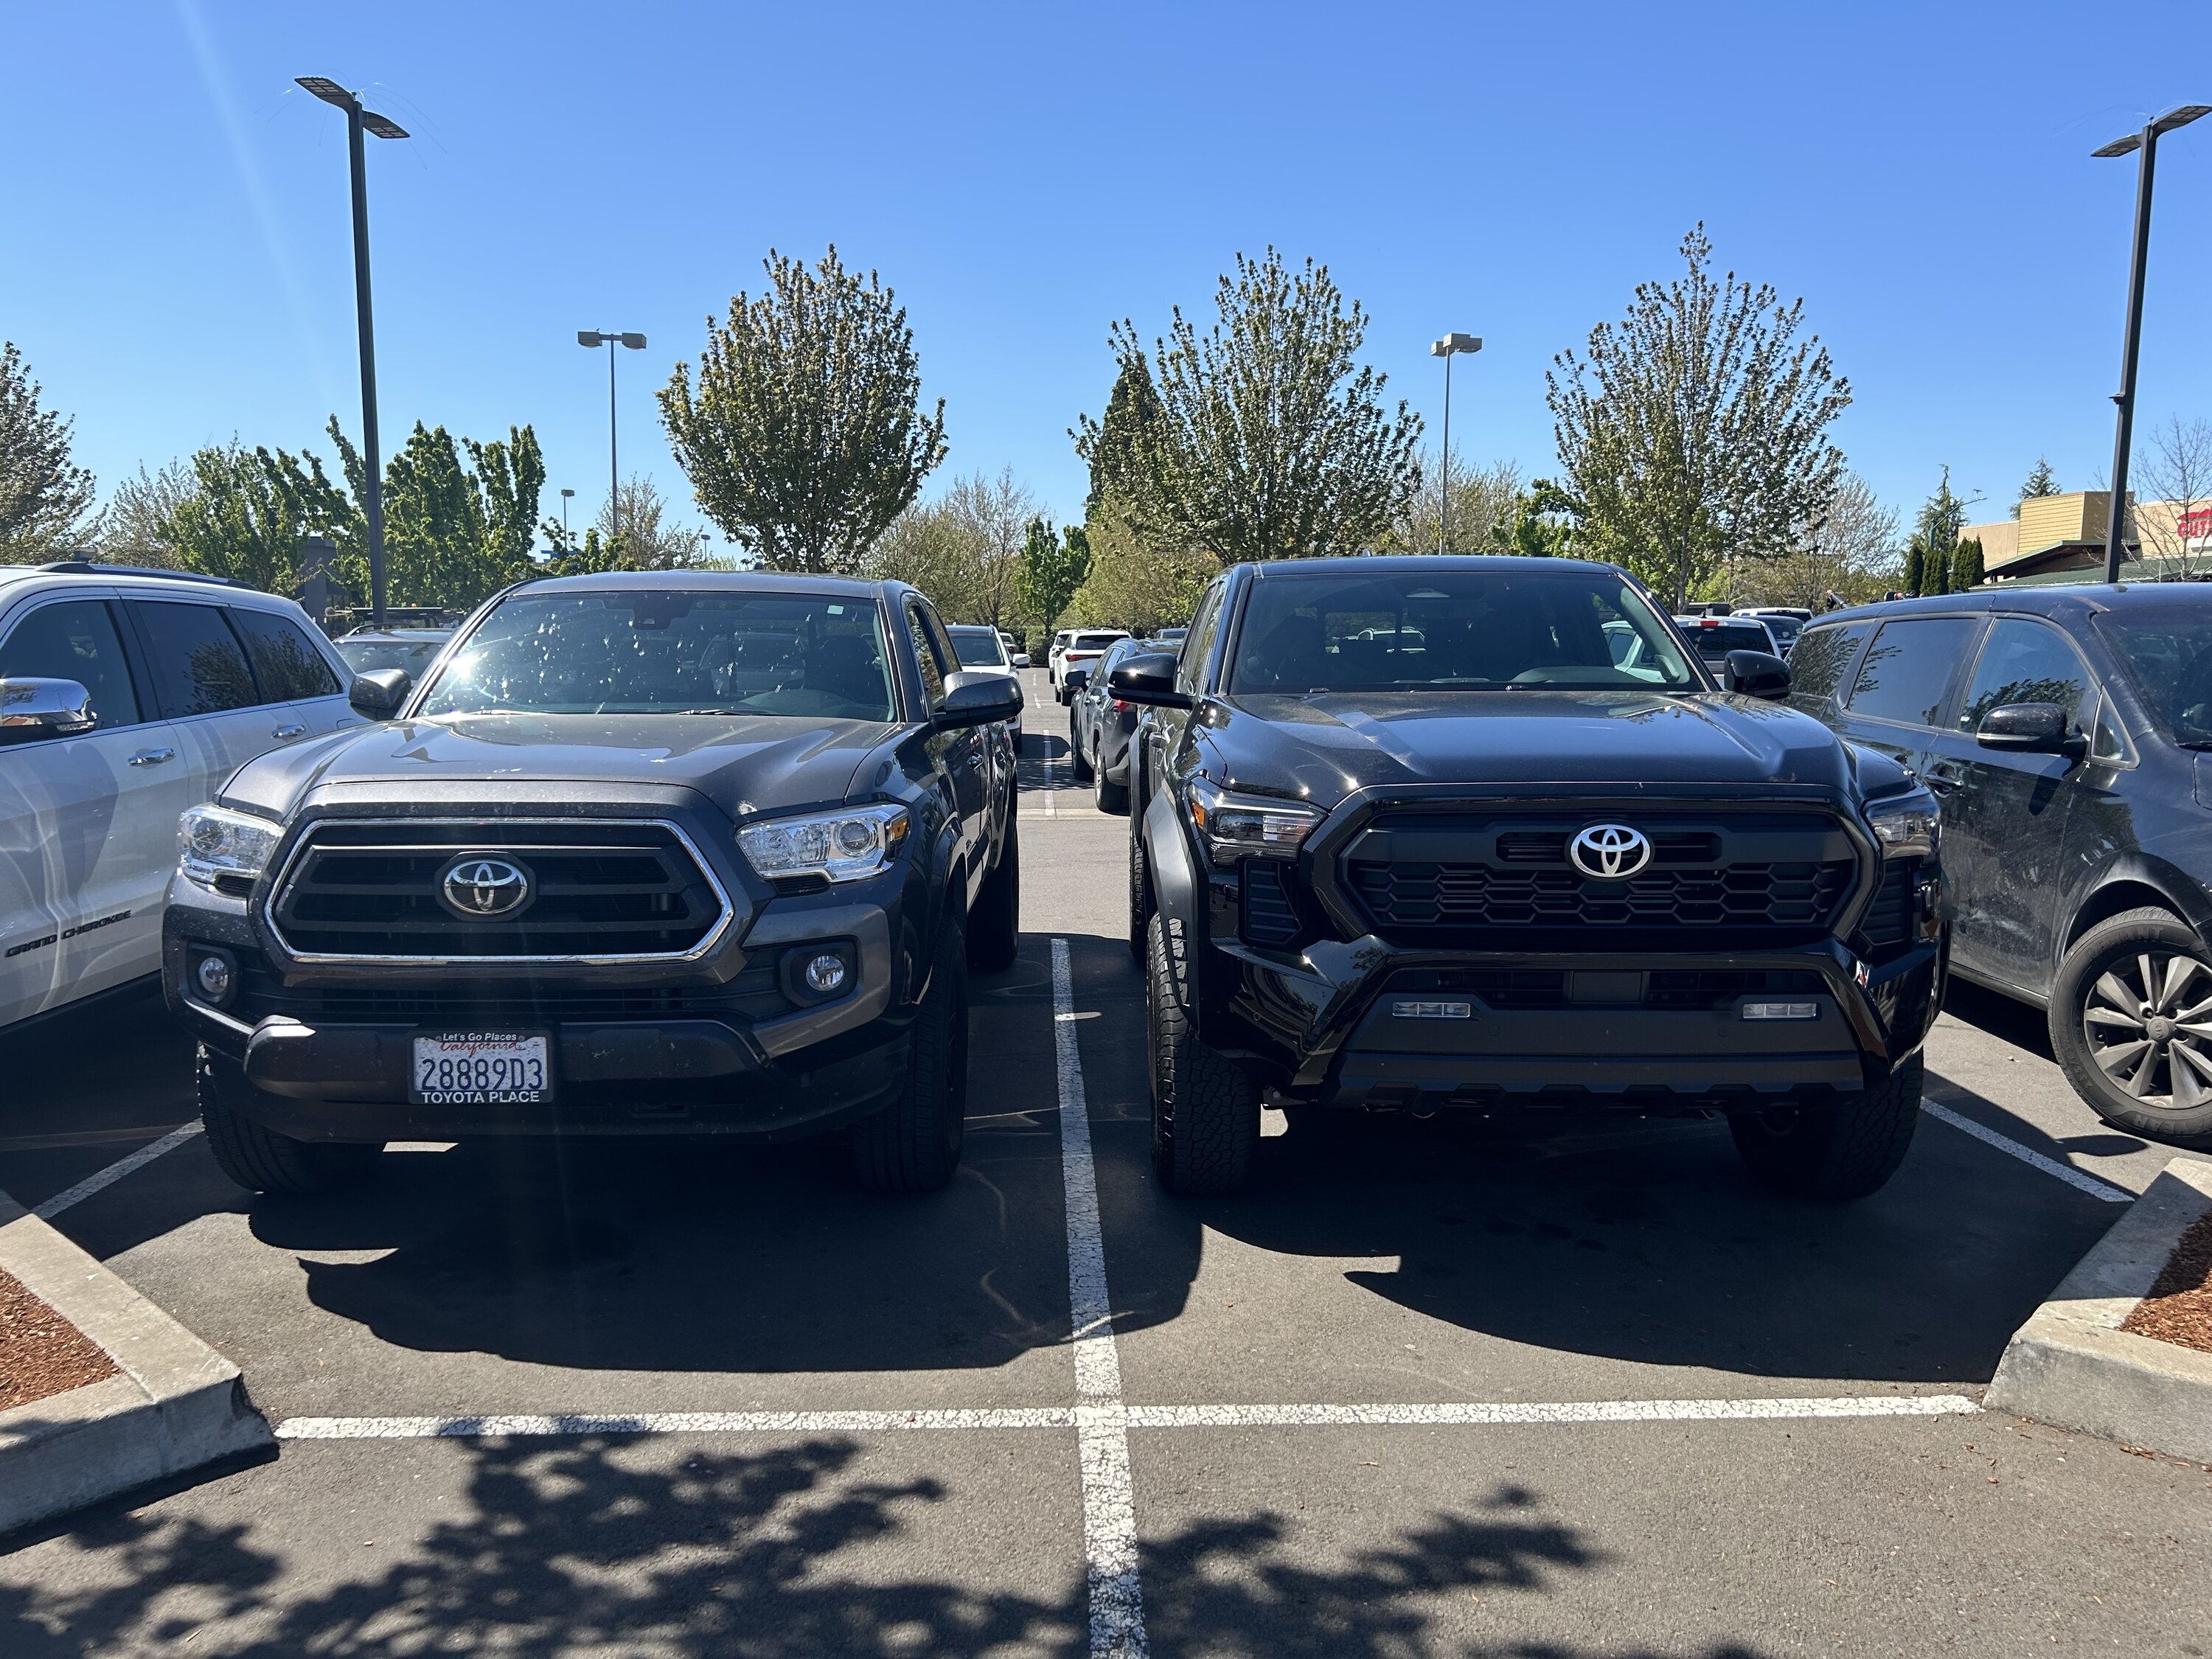 2024 Tacoma Side by Side Comparison: 4th Gen vs 3rd Gen Tacoma IMG_3598